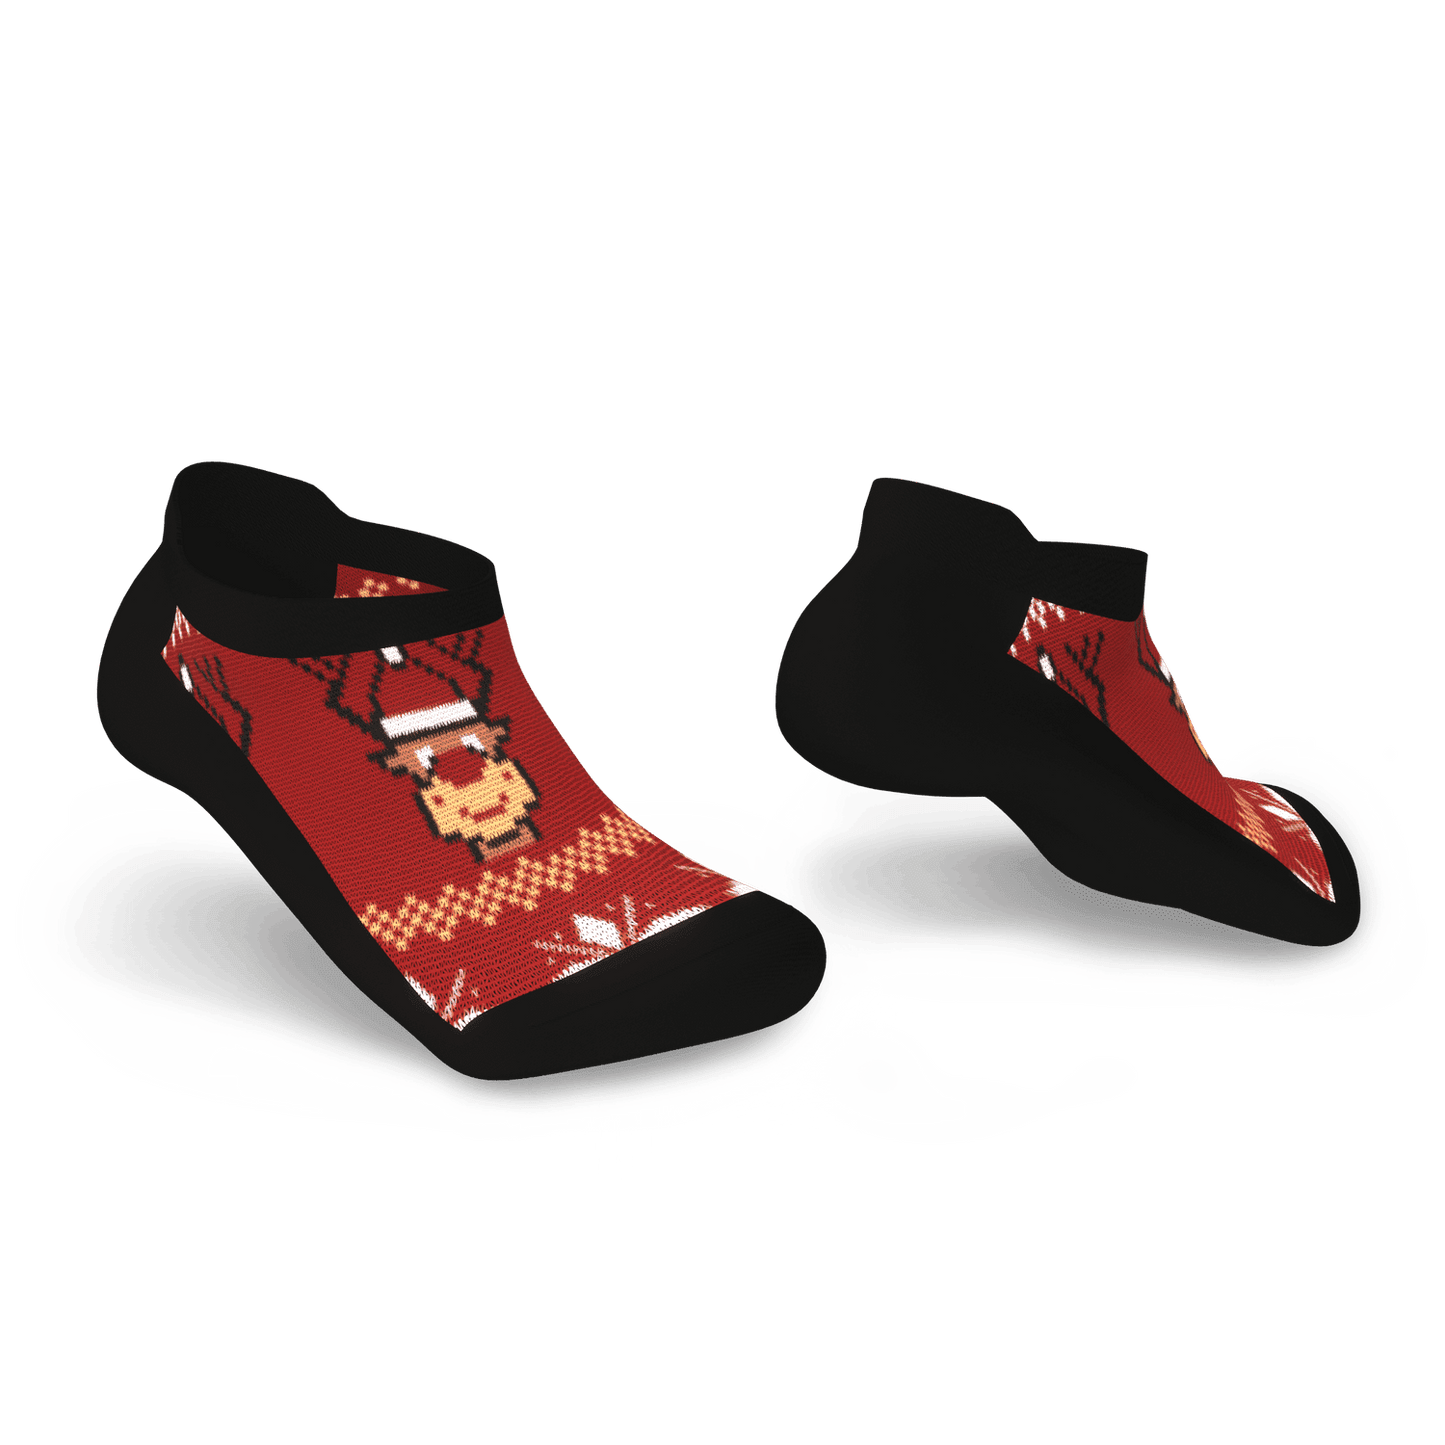 Rudolph the red nosed reindeer socks